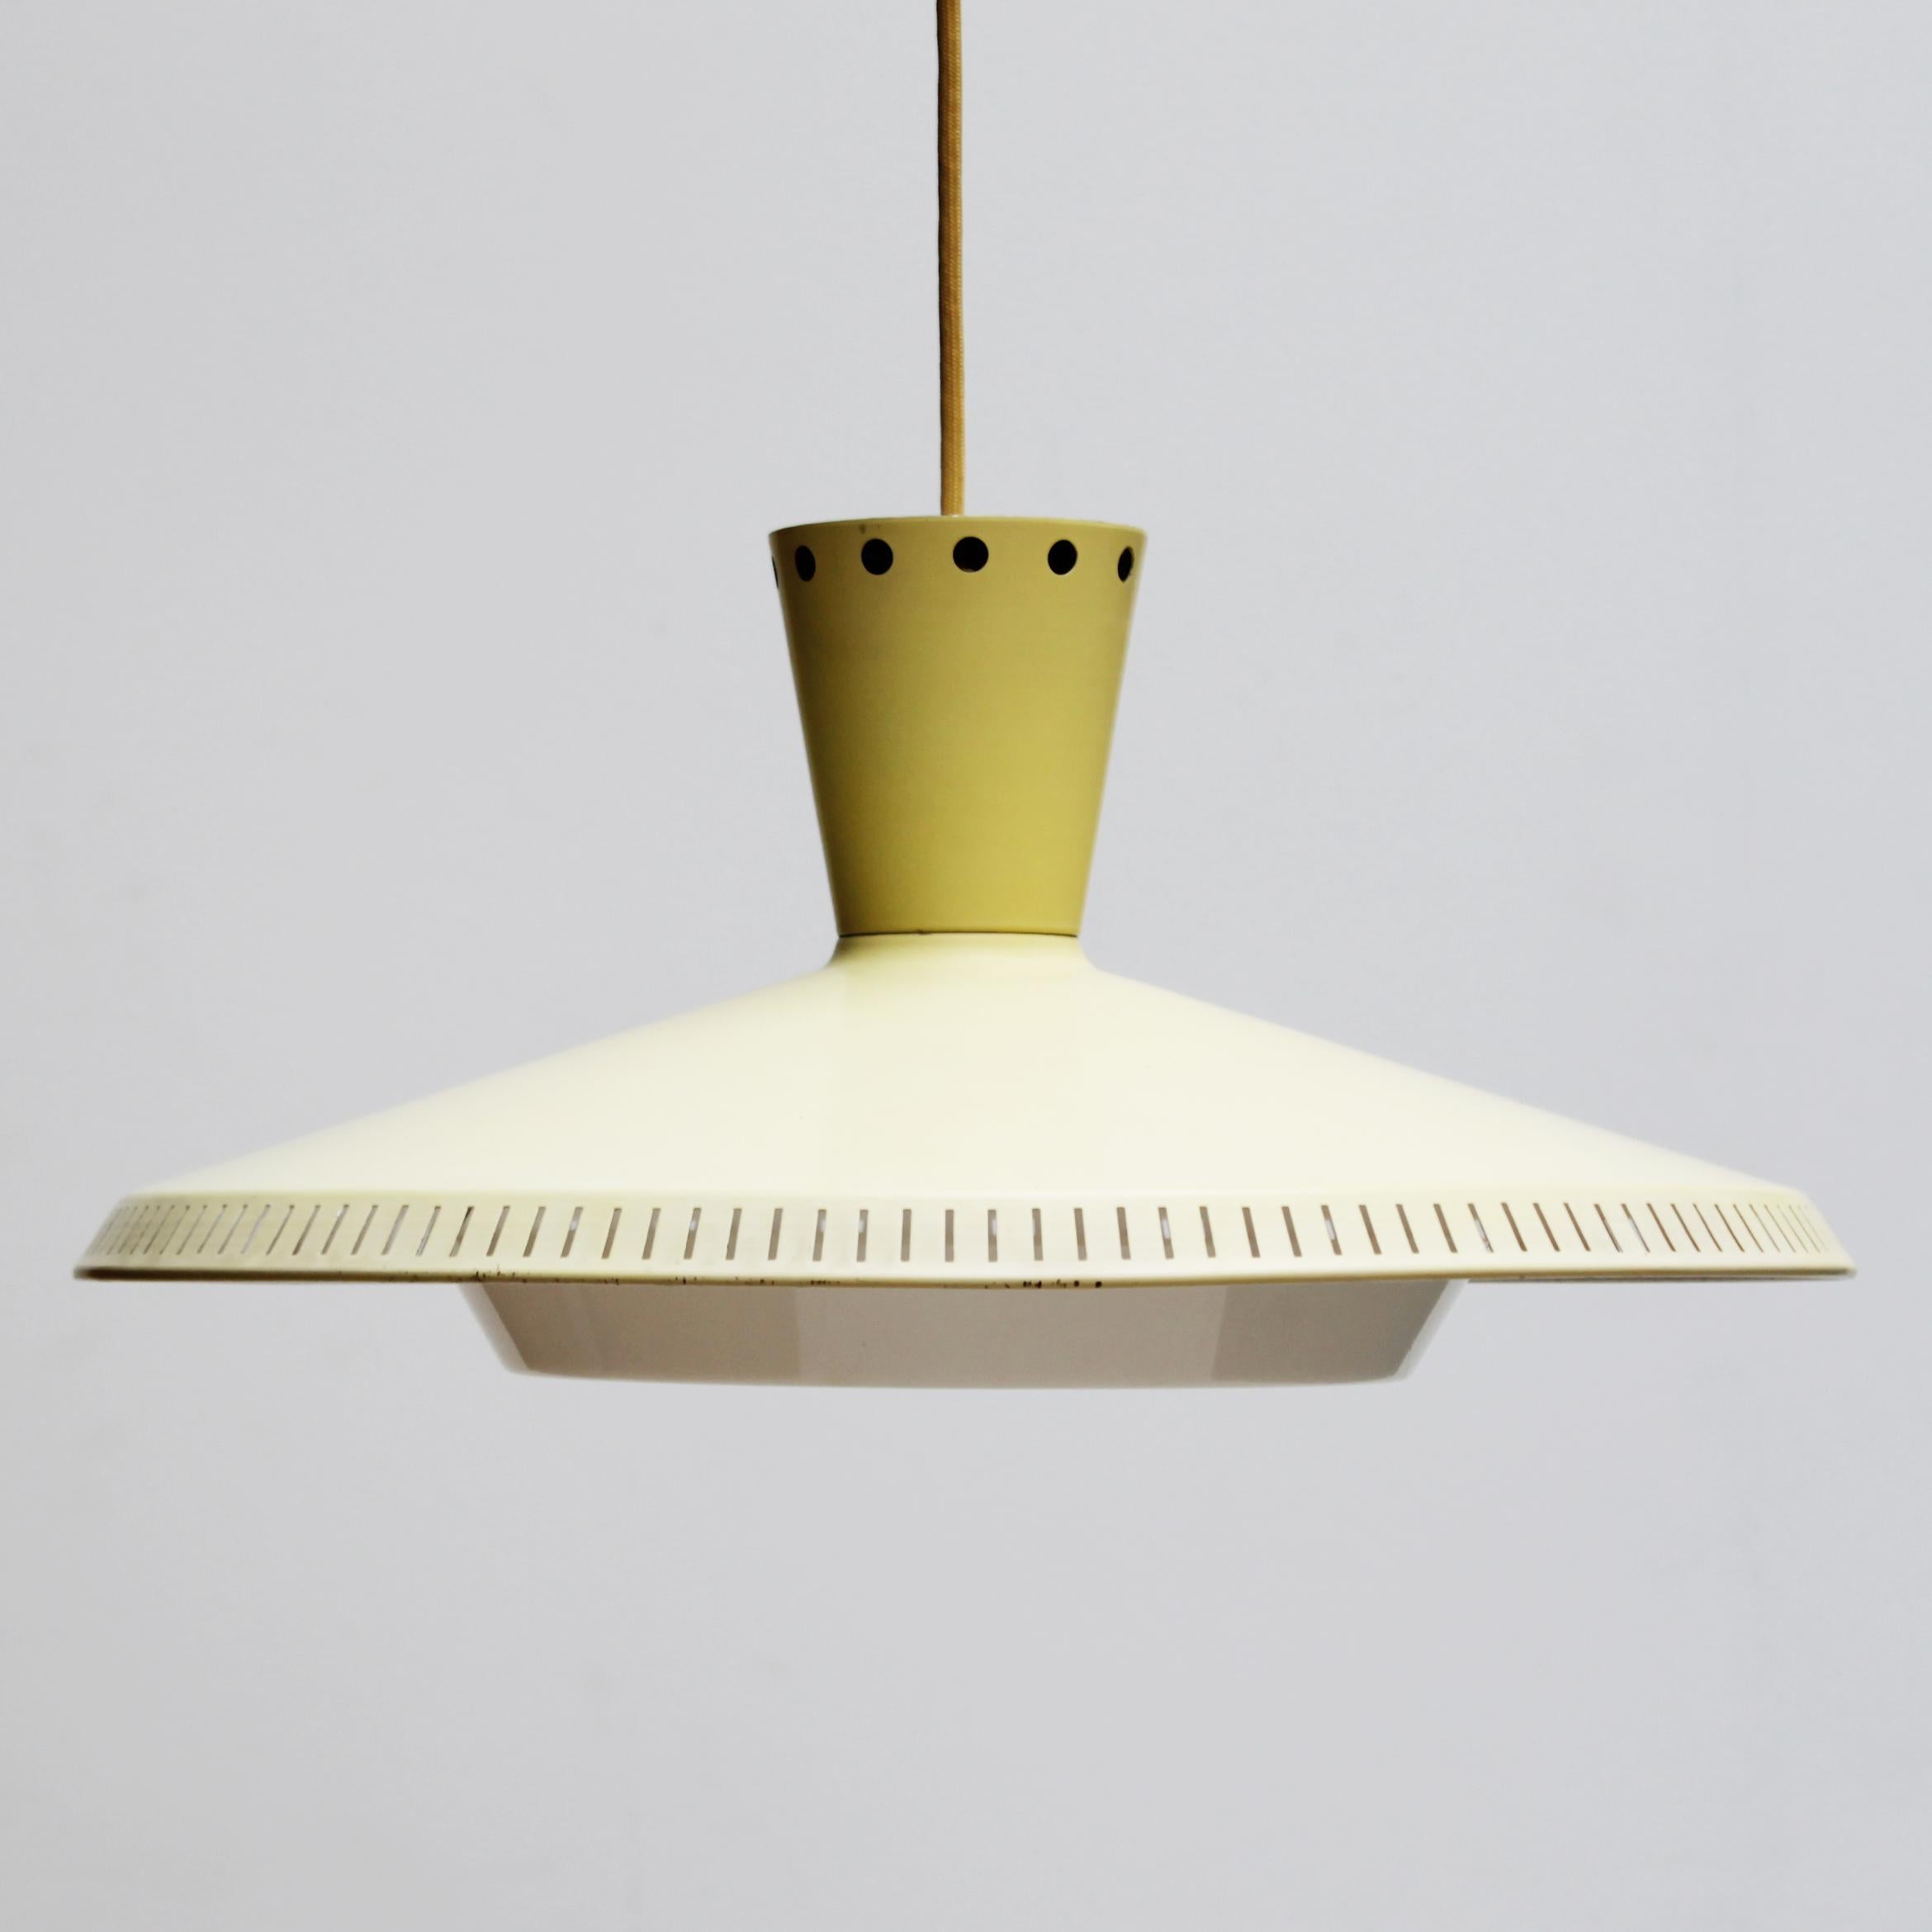 Yellow (naples yellow) pendant lamp by Louis Kalff for Philips, Dutch 1950’s.
Dimensions: Height 23 cm x diameter 48 cm.
The fixture is equipped with the original, regular (E26-E27) Edison screw lamp socket. Max. 40 Watt. Textile wire. Electric